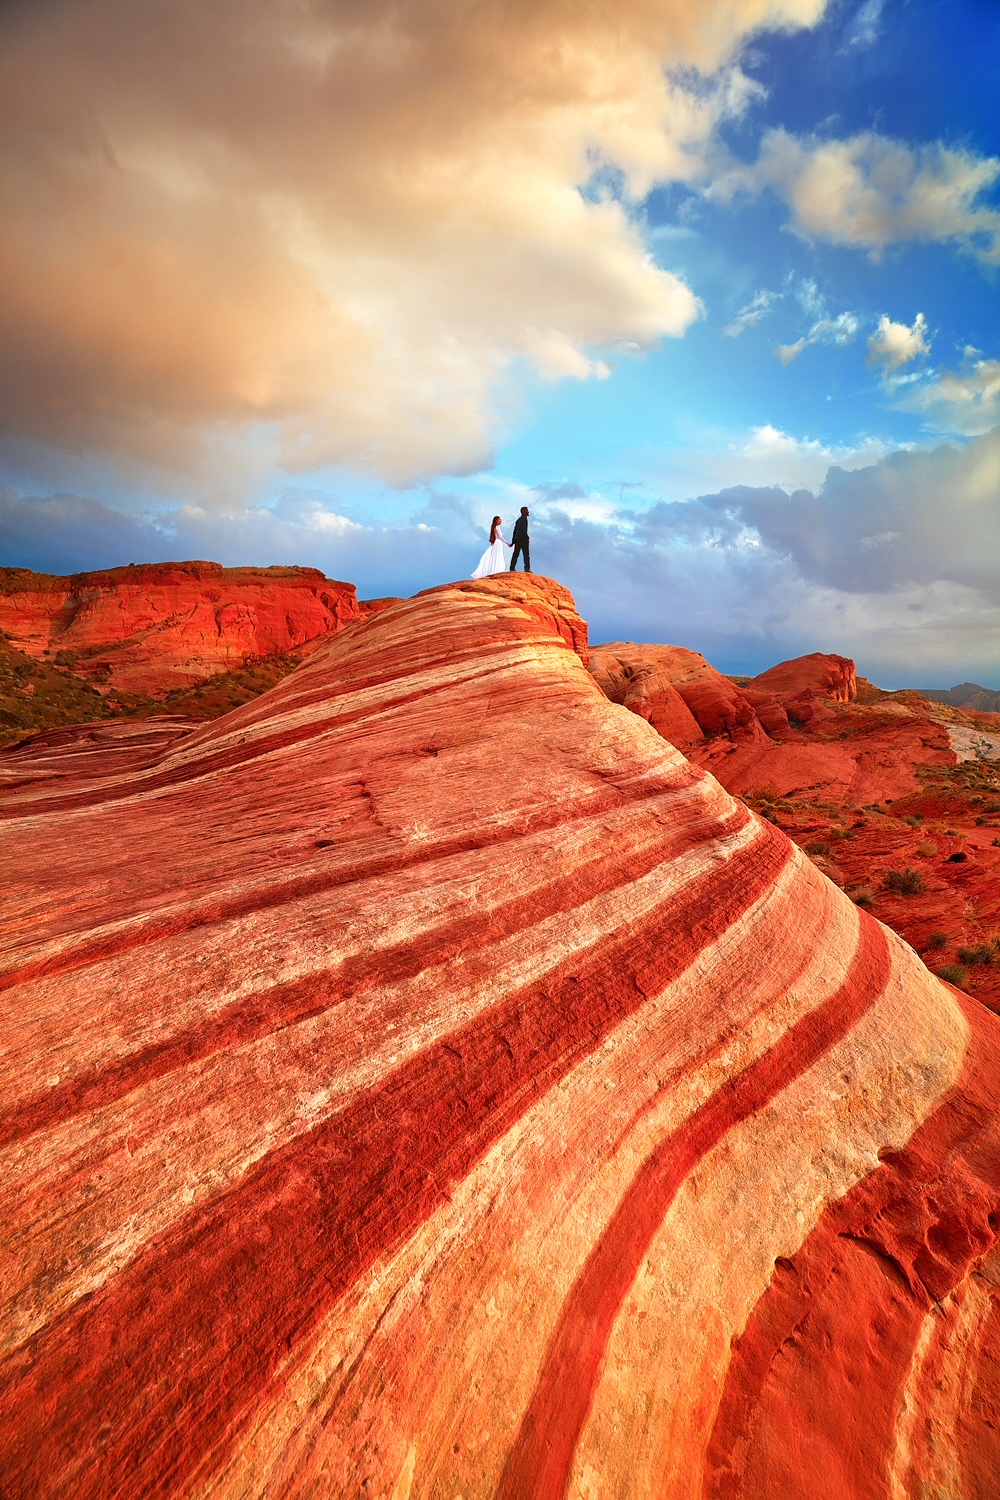 Couple standing on top of the Fire Wave striped rock formation in Valley of Fire State Park in Nevada.